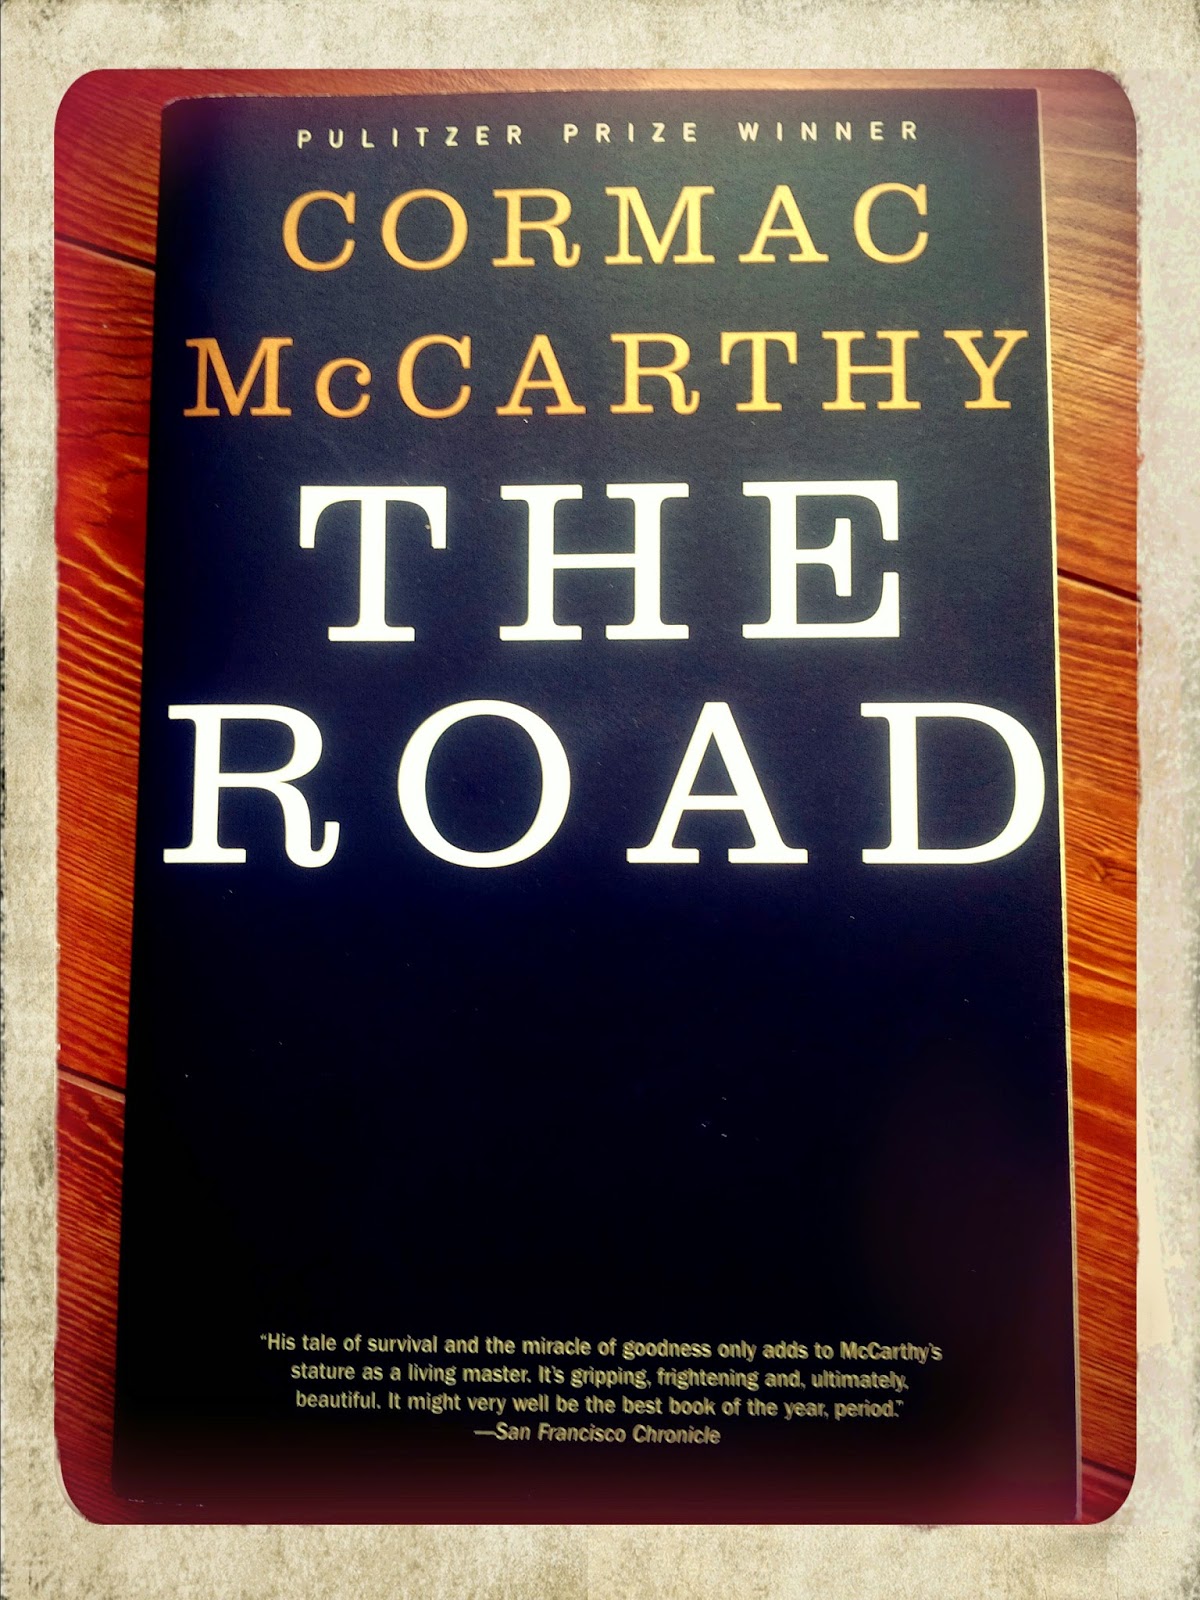 new york times book review the road by cormac mccarthy